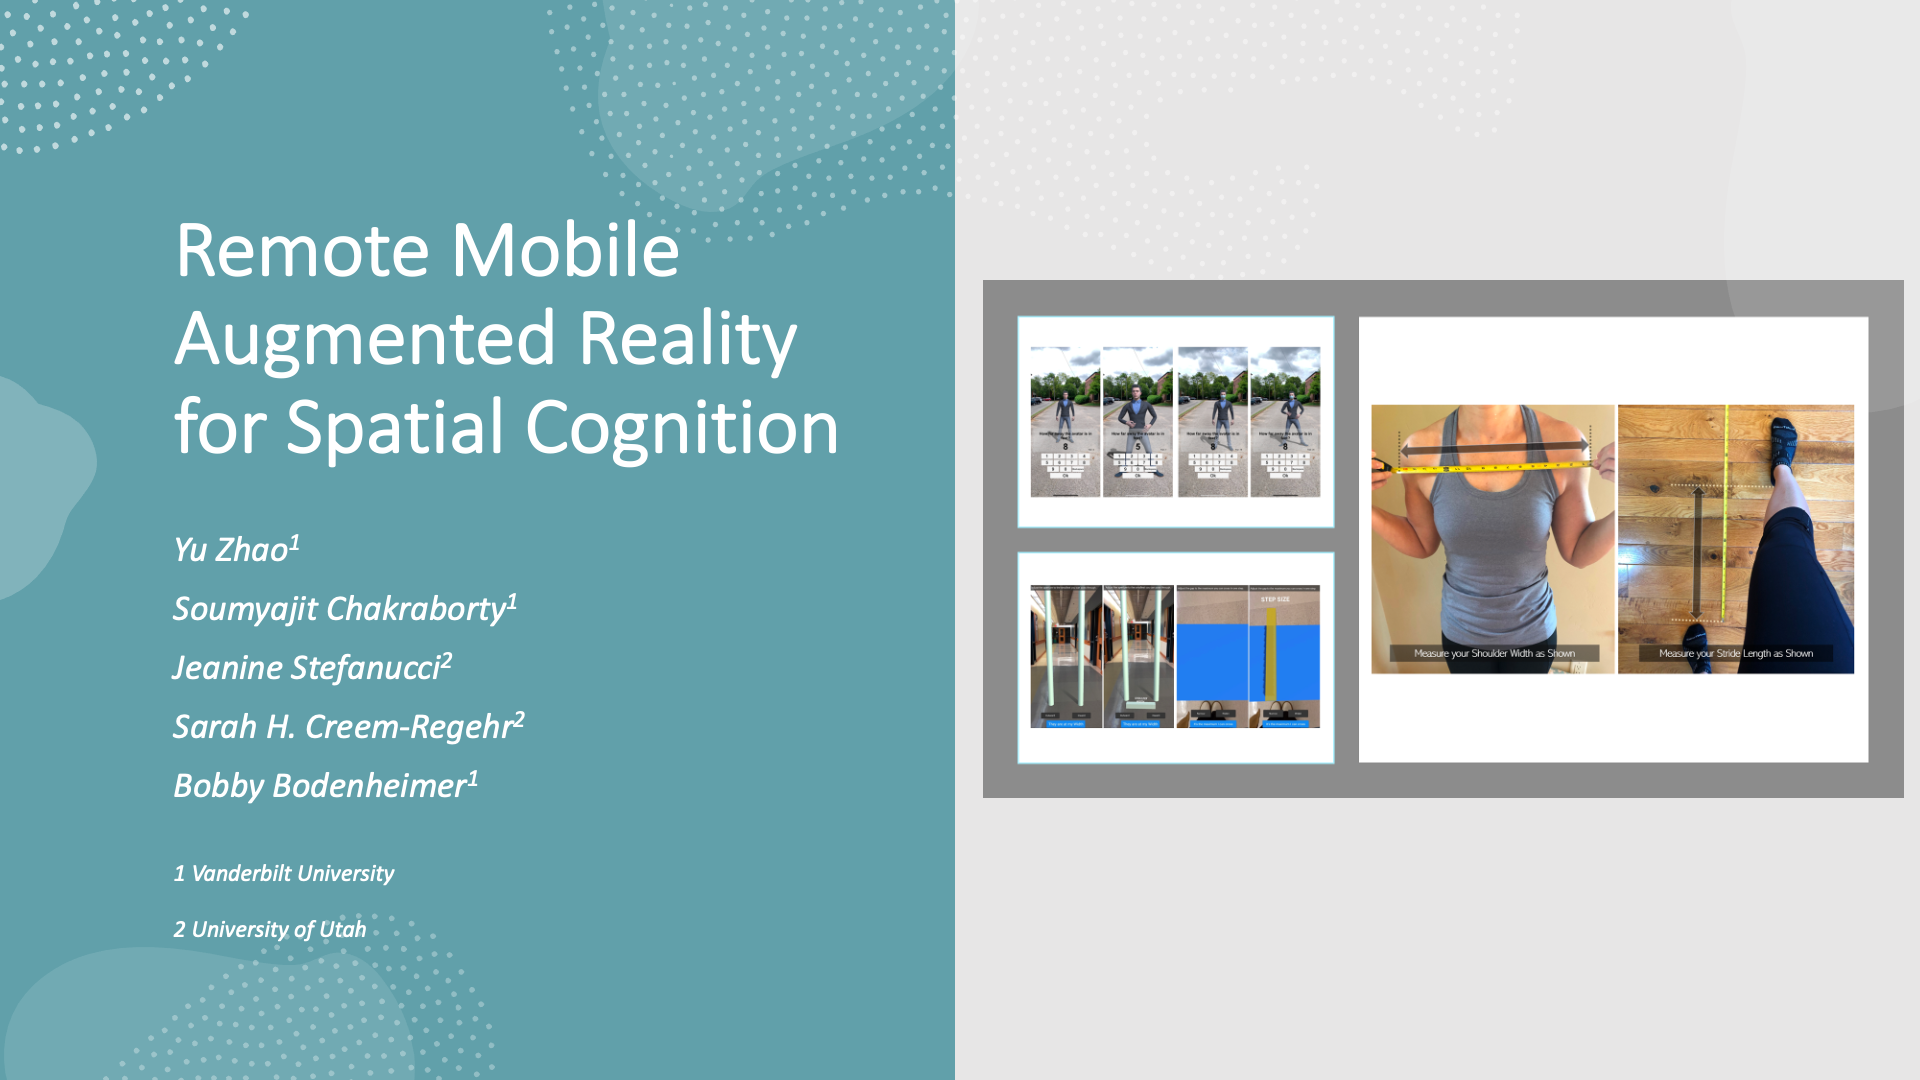 Remote Mobile Augmented Reality for Spatial Cognition